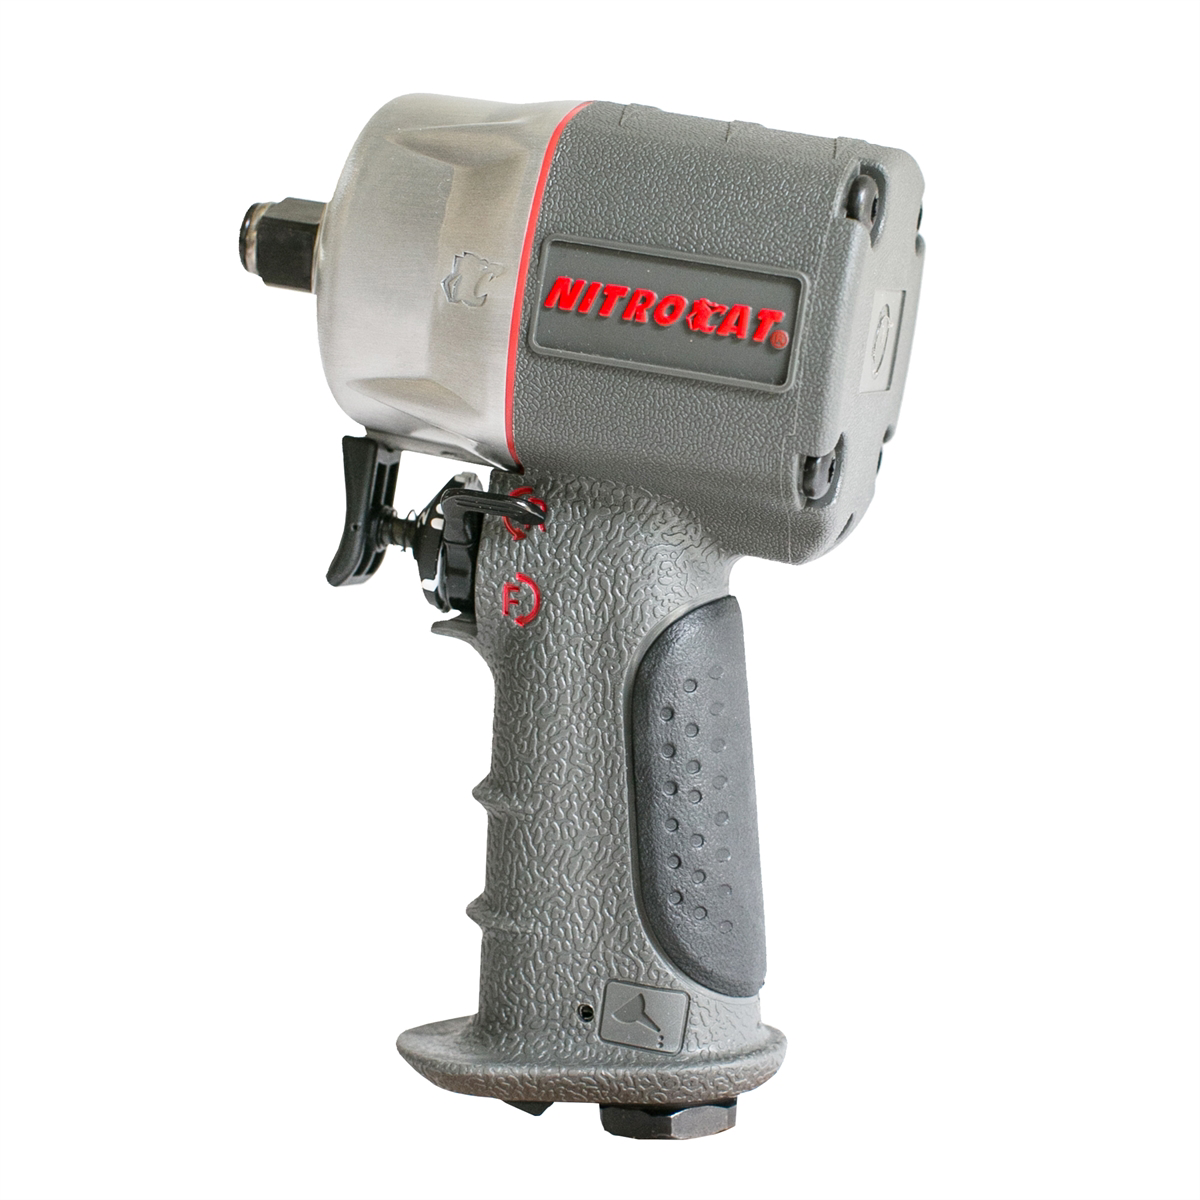 3/8" COMPACT IMPACT WRENCH